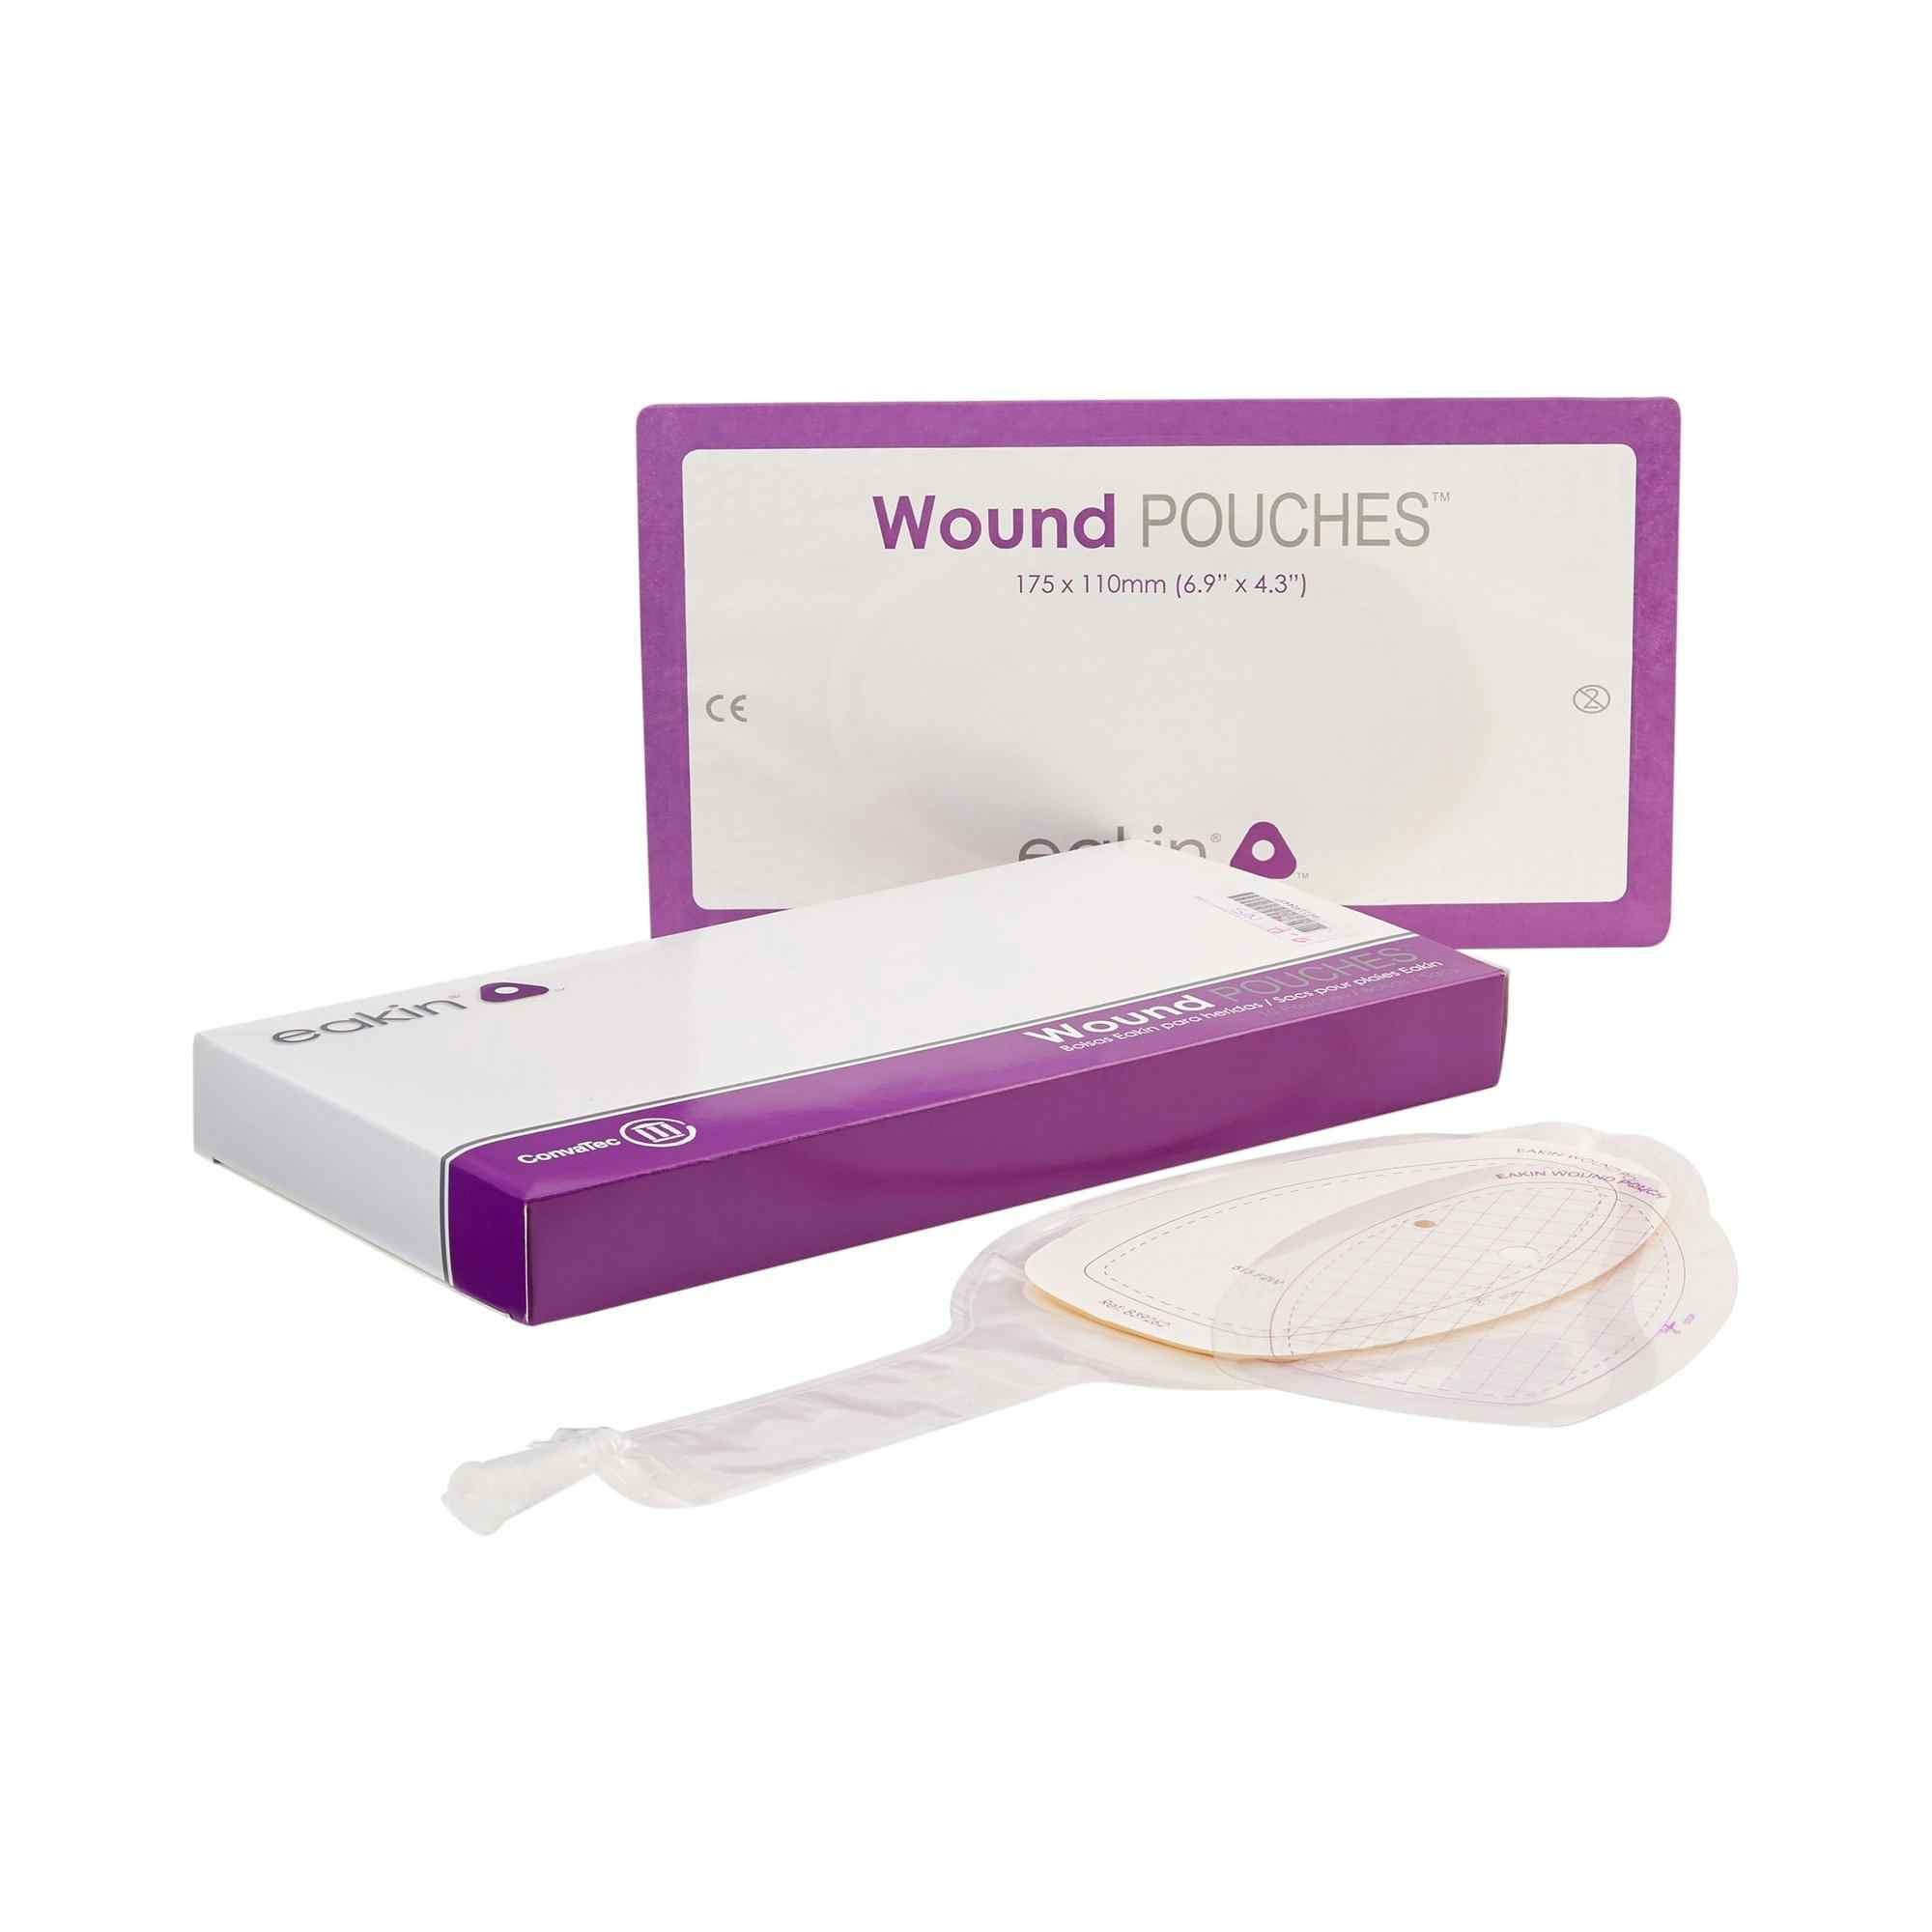 Eakin Fistula and Wound Drainage Pouch, 839262, 4-3/10 X 6-9/10" - Pack of 5